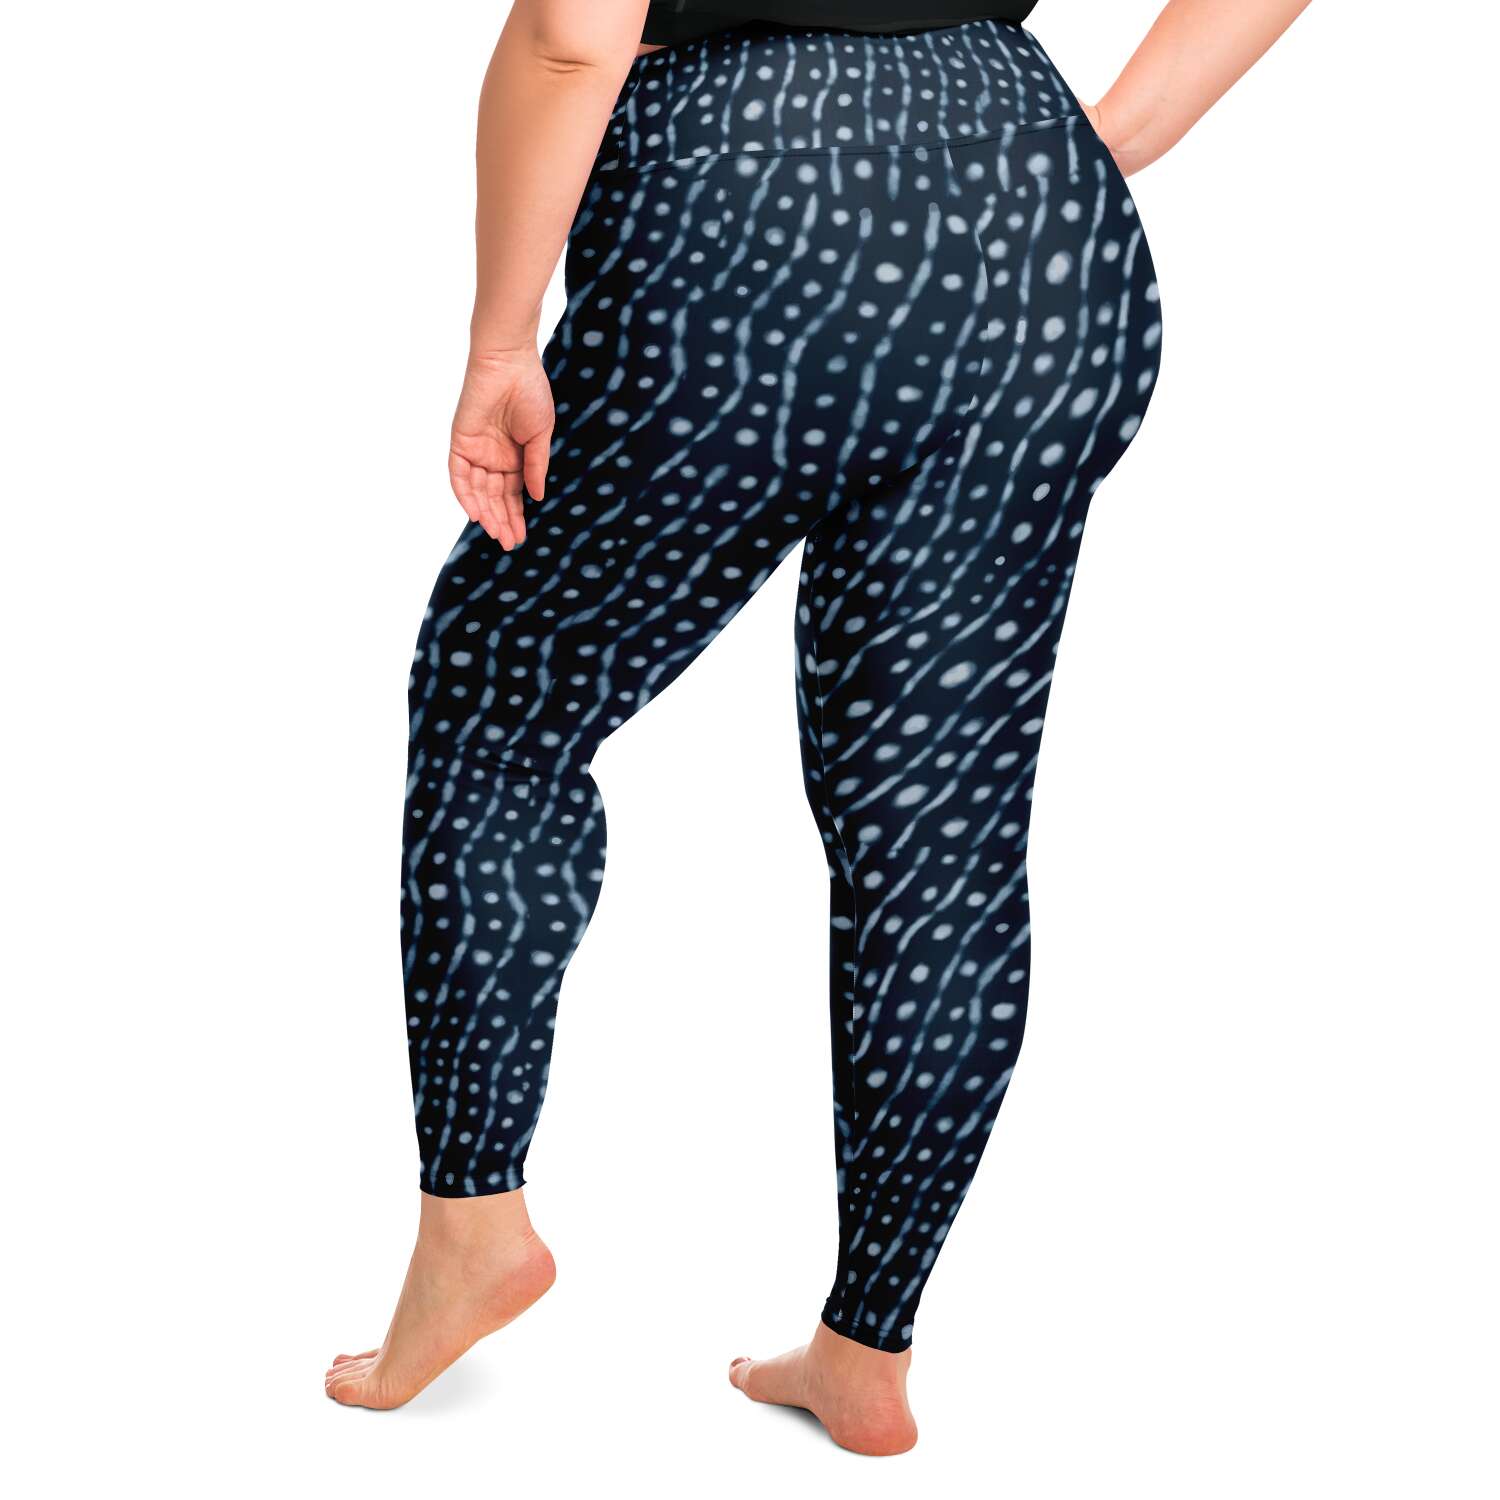 Back and side view of model wearing whale shark leggings / skins plus size